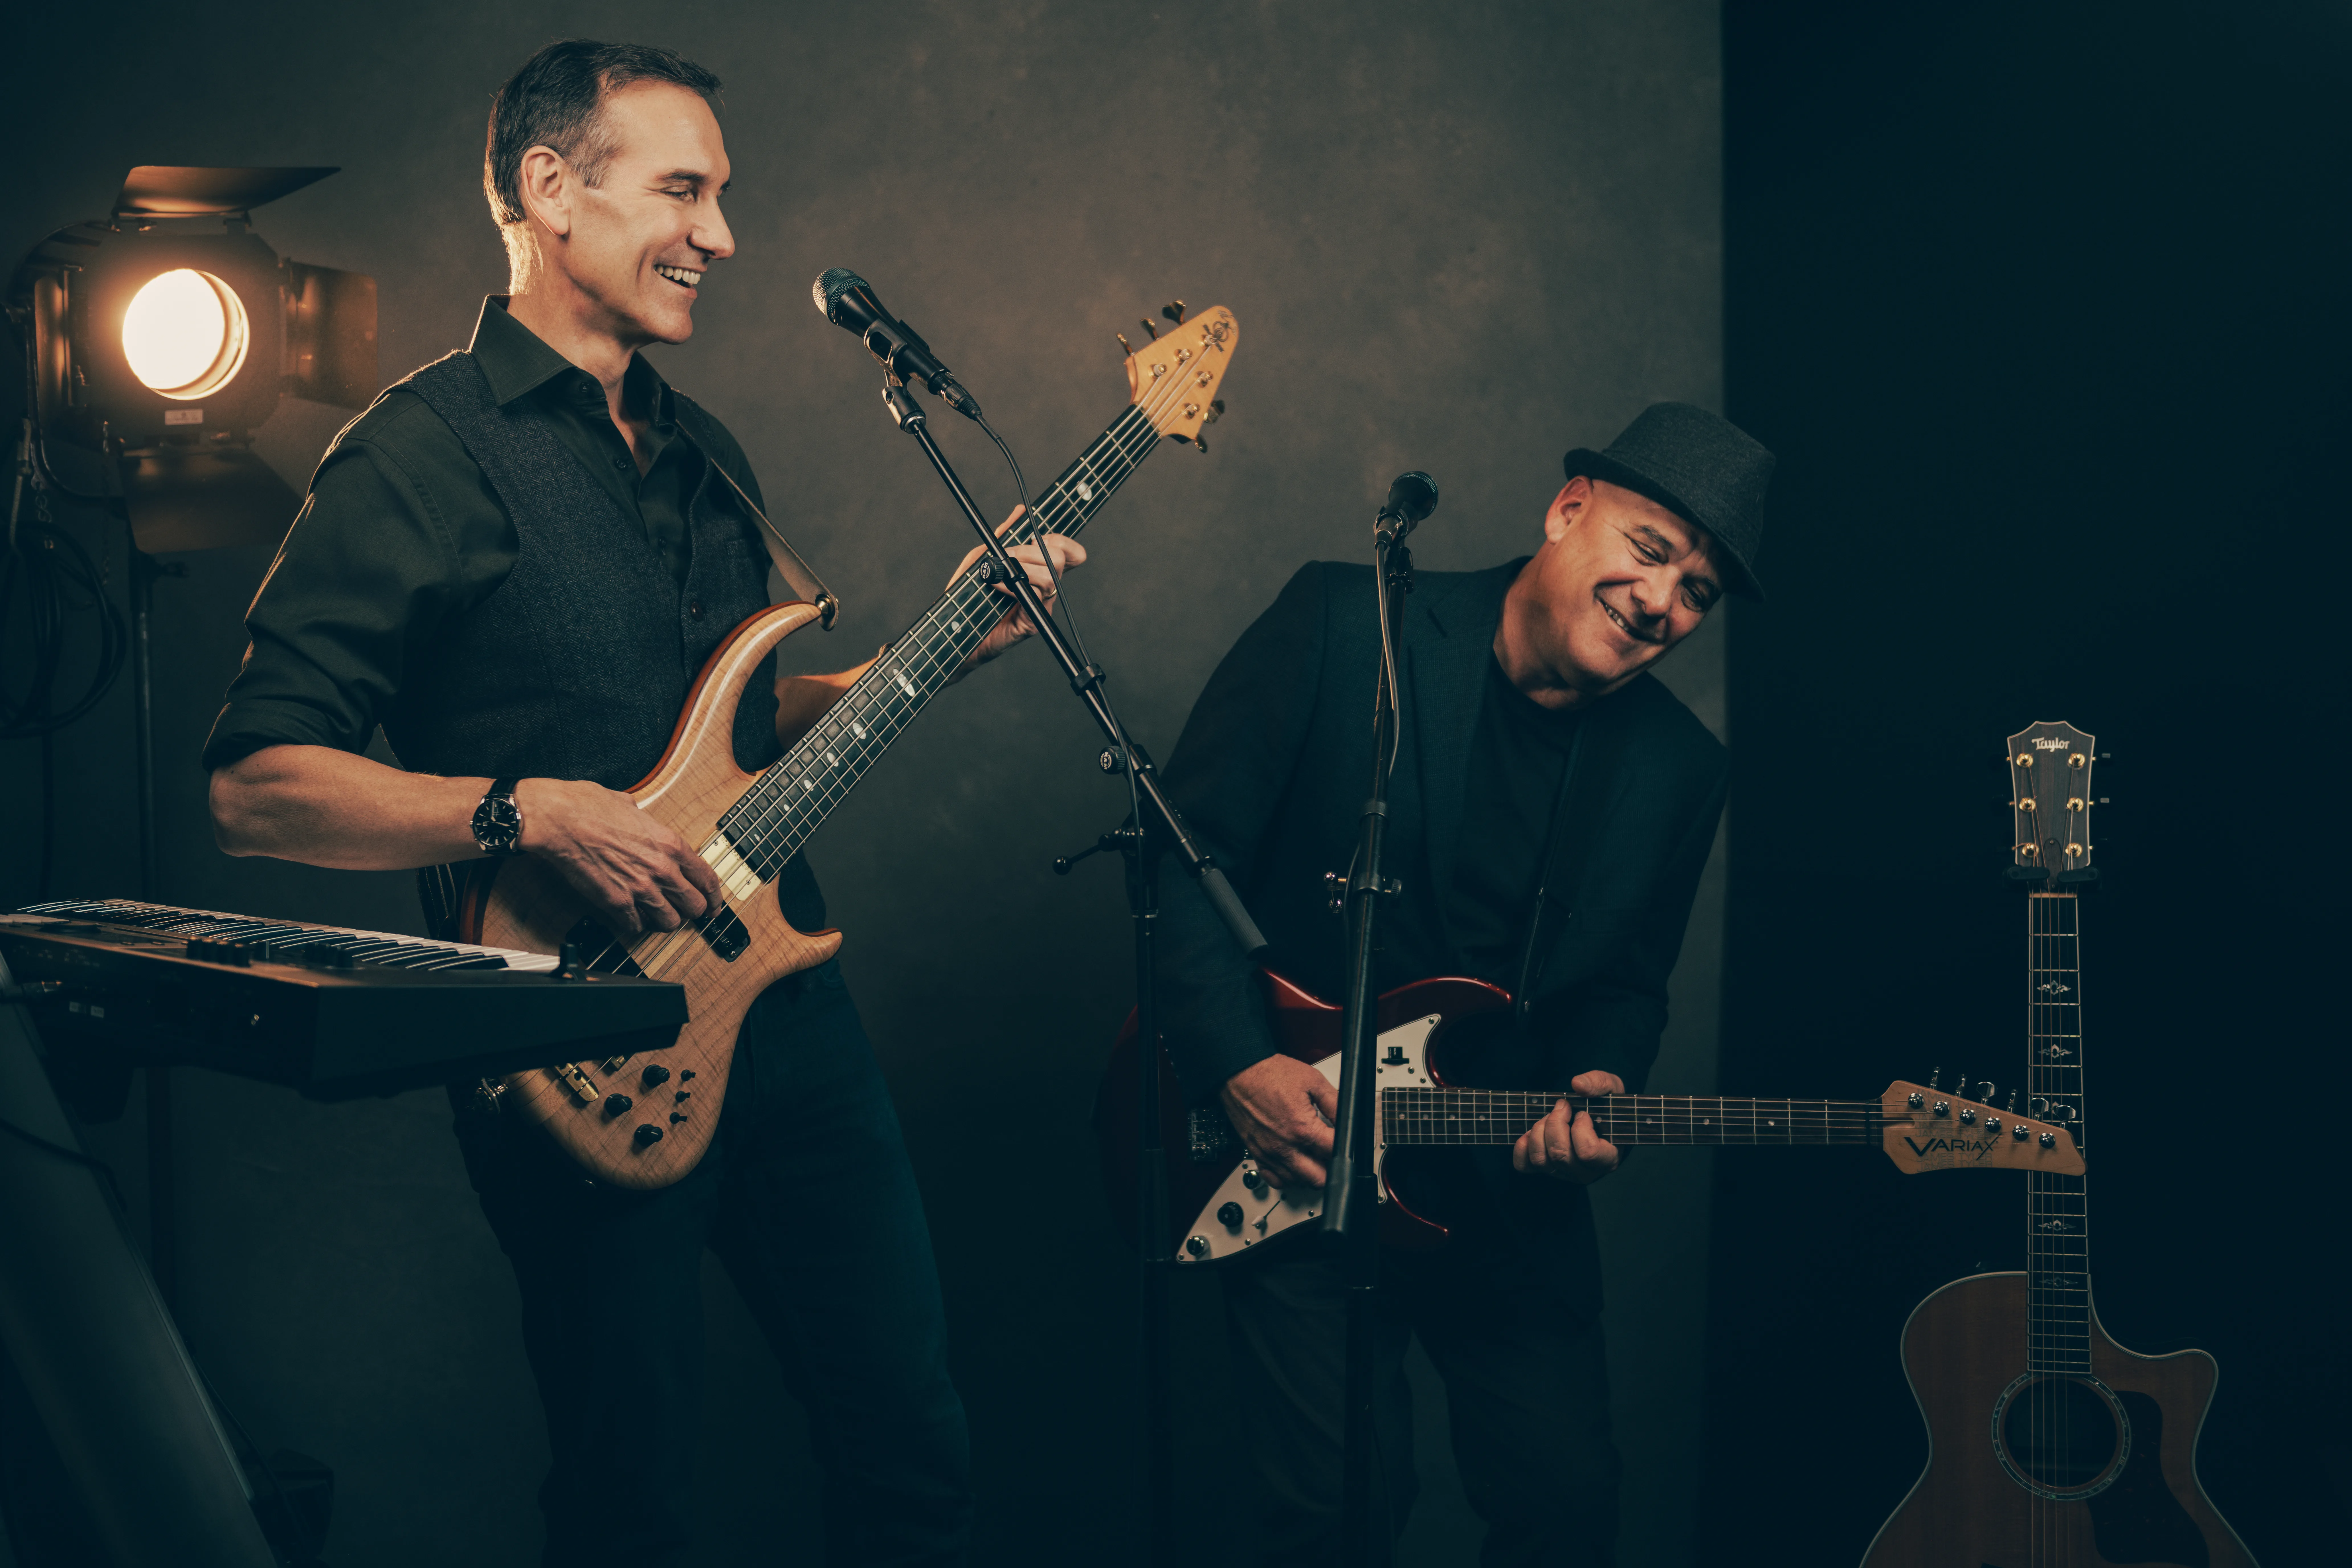 Musicians with electric guitars sharing a moment of joy, highlighted by moody lighting in a personal brand photoshoot that captures their creative essence.